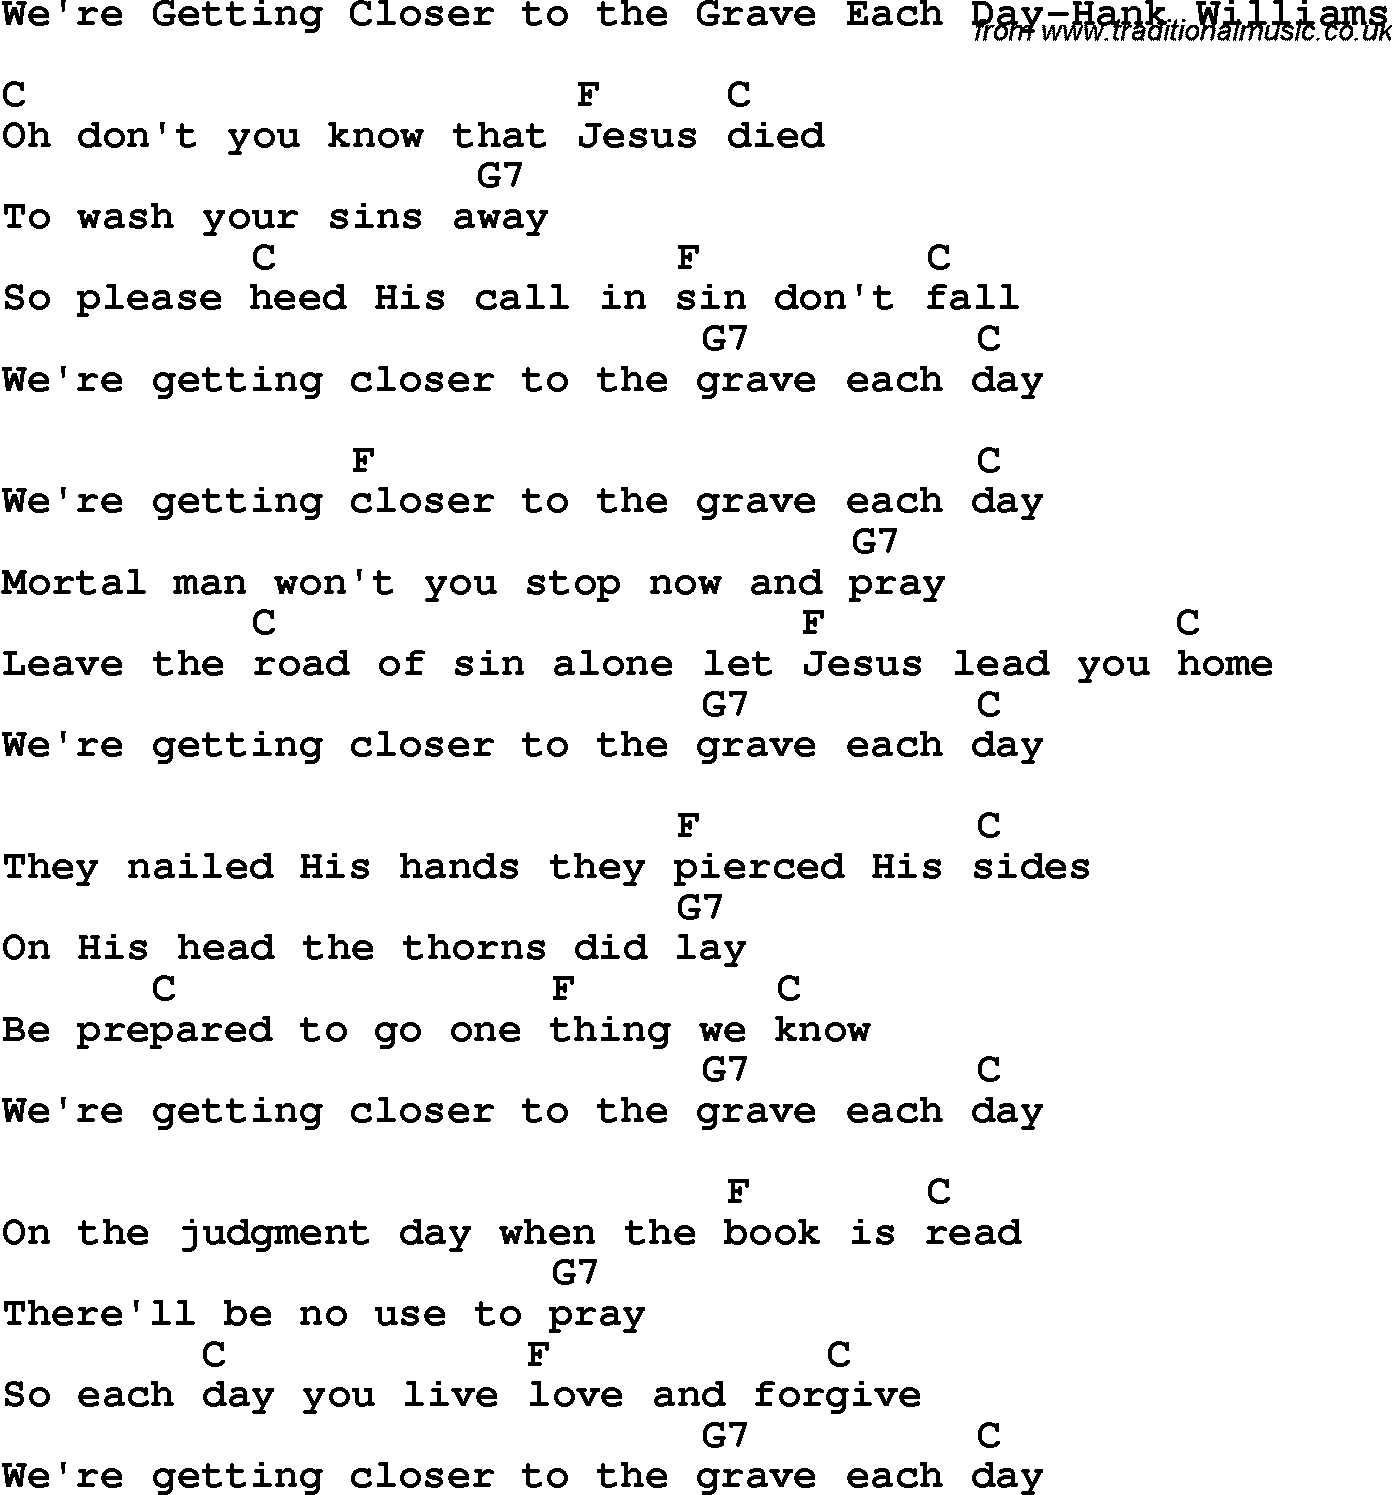 Country, Southern and Bluegrass Gospel Song We're Getting Closer to the Grave Each Day-Hank Williams lyrics and chords